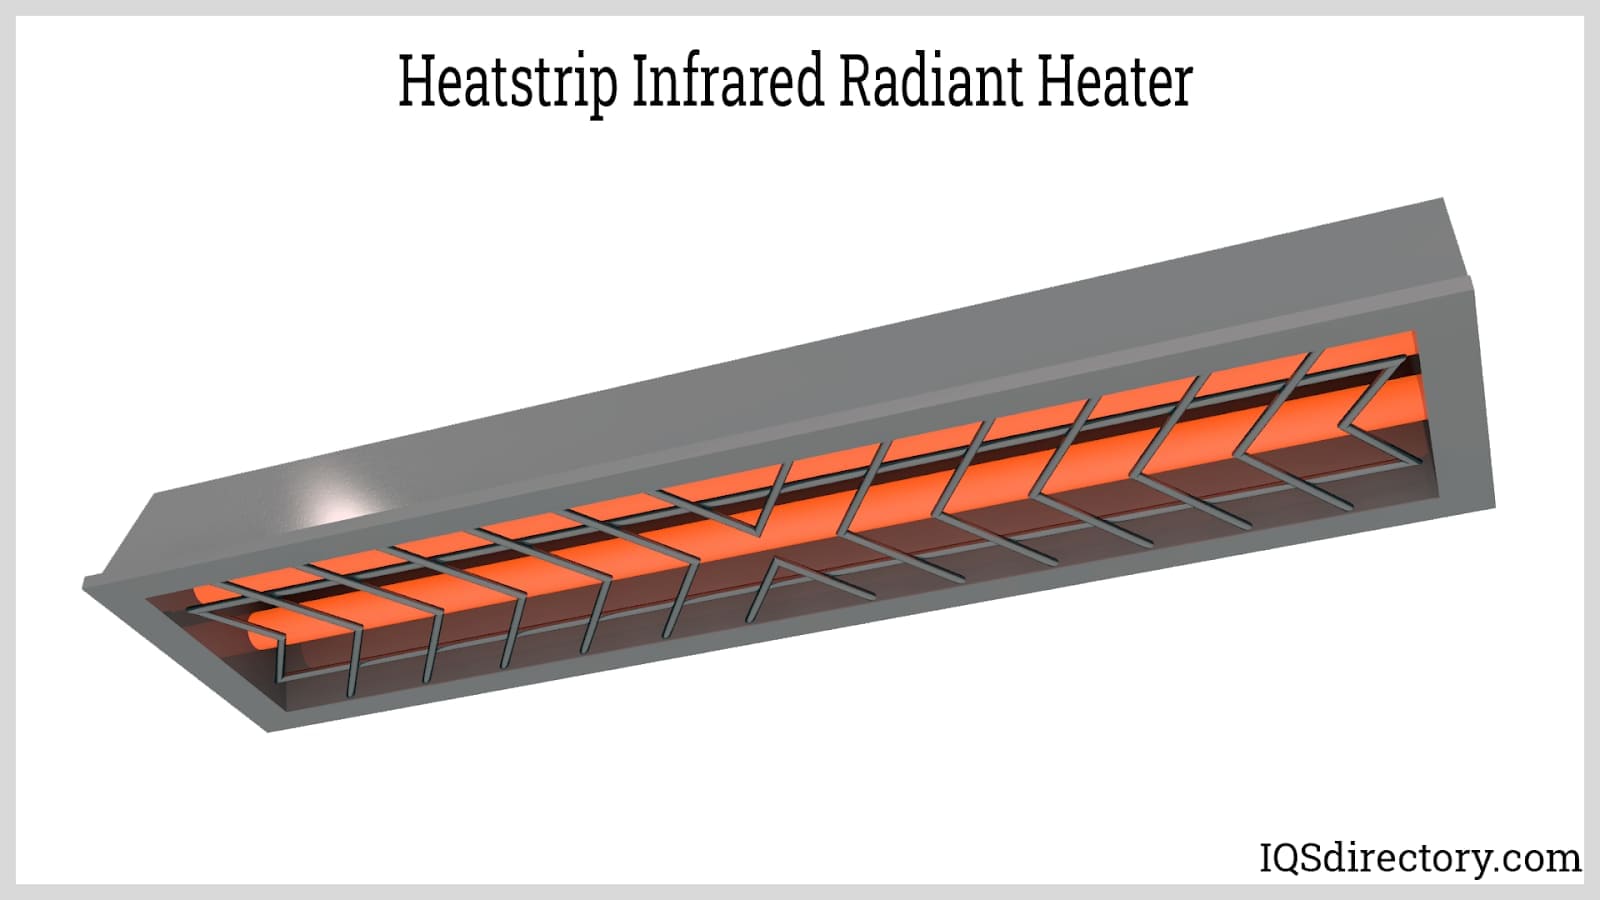 Electric Heaters: Types, Components, Benefits and Design